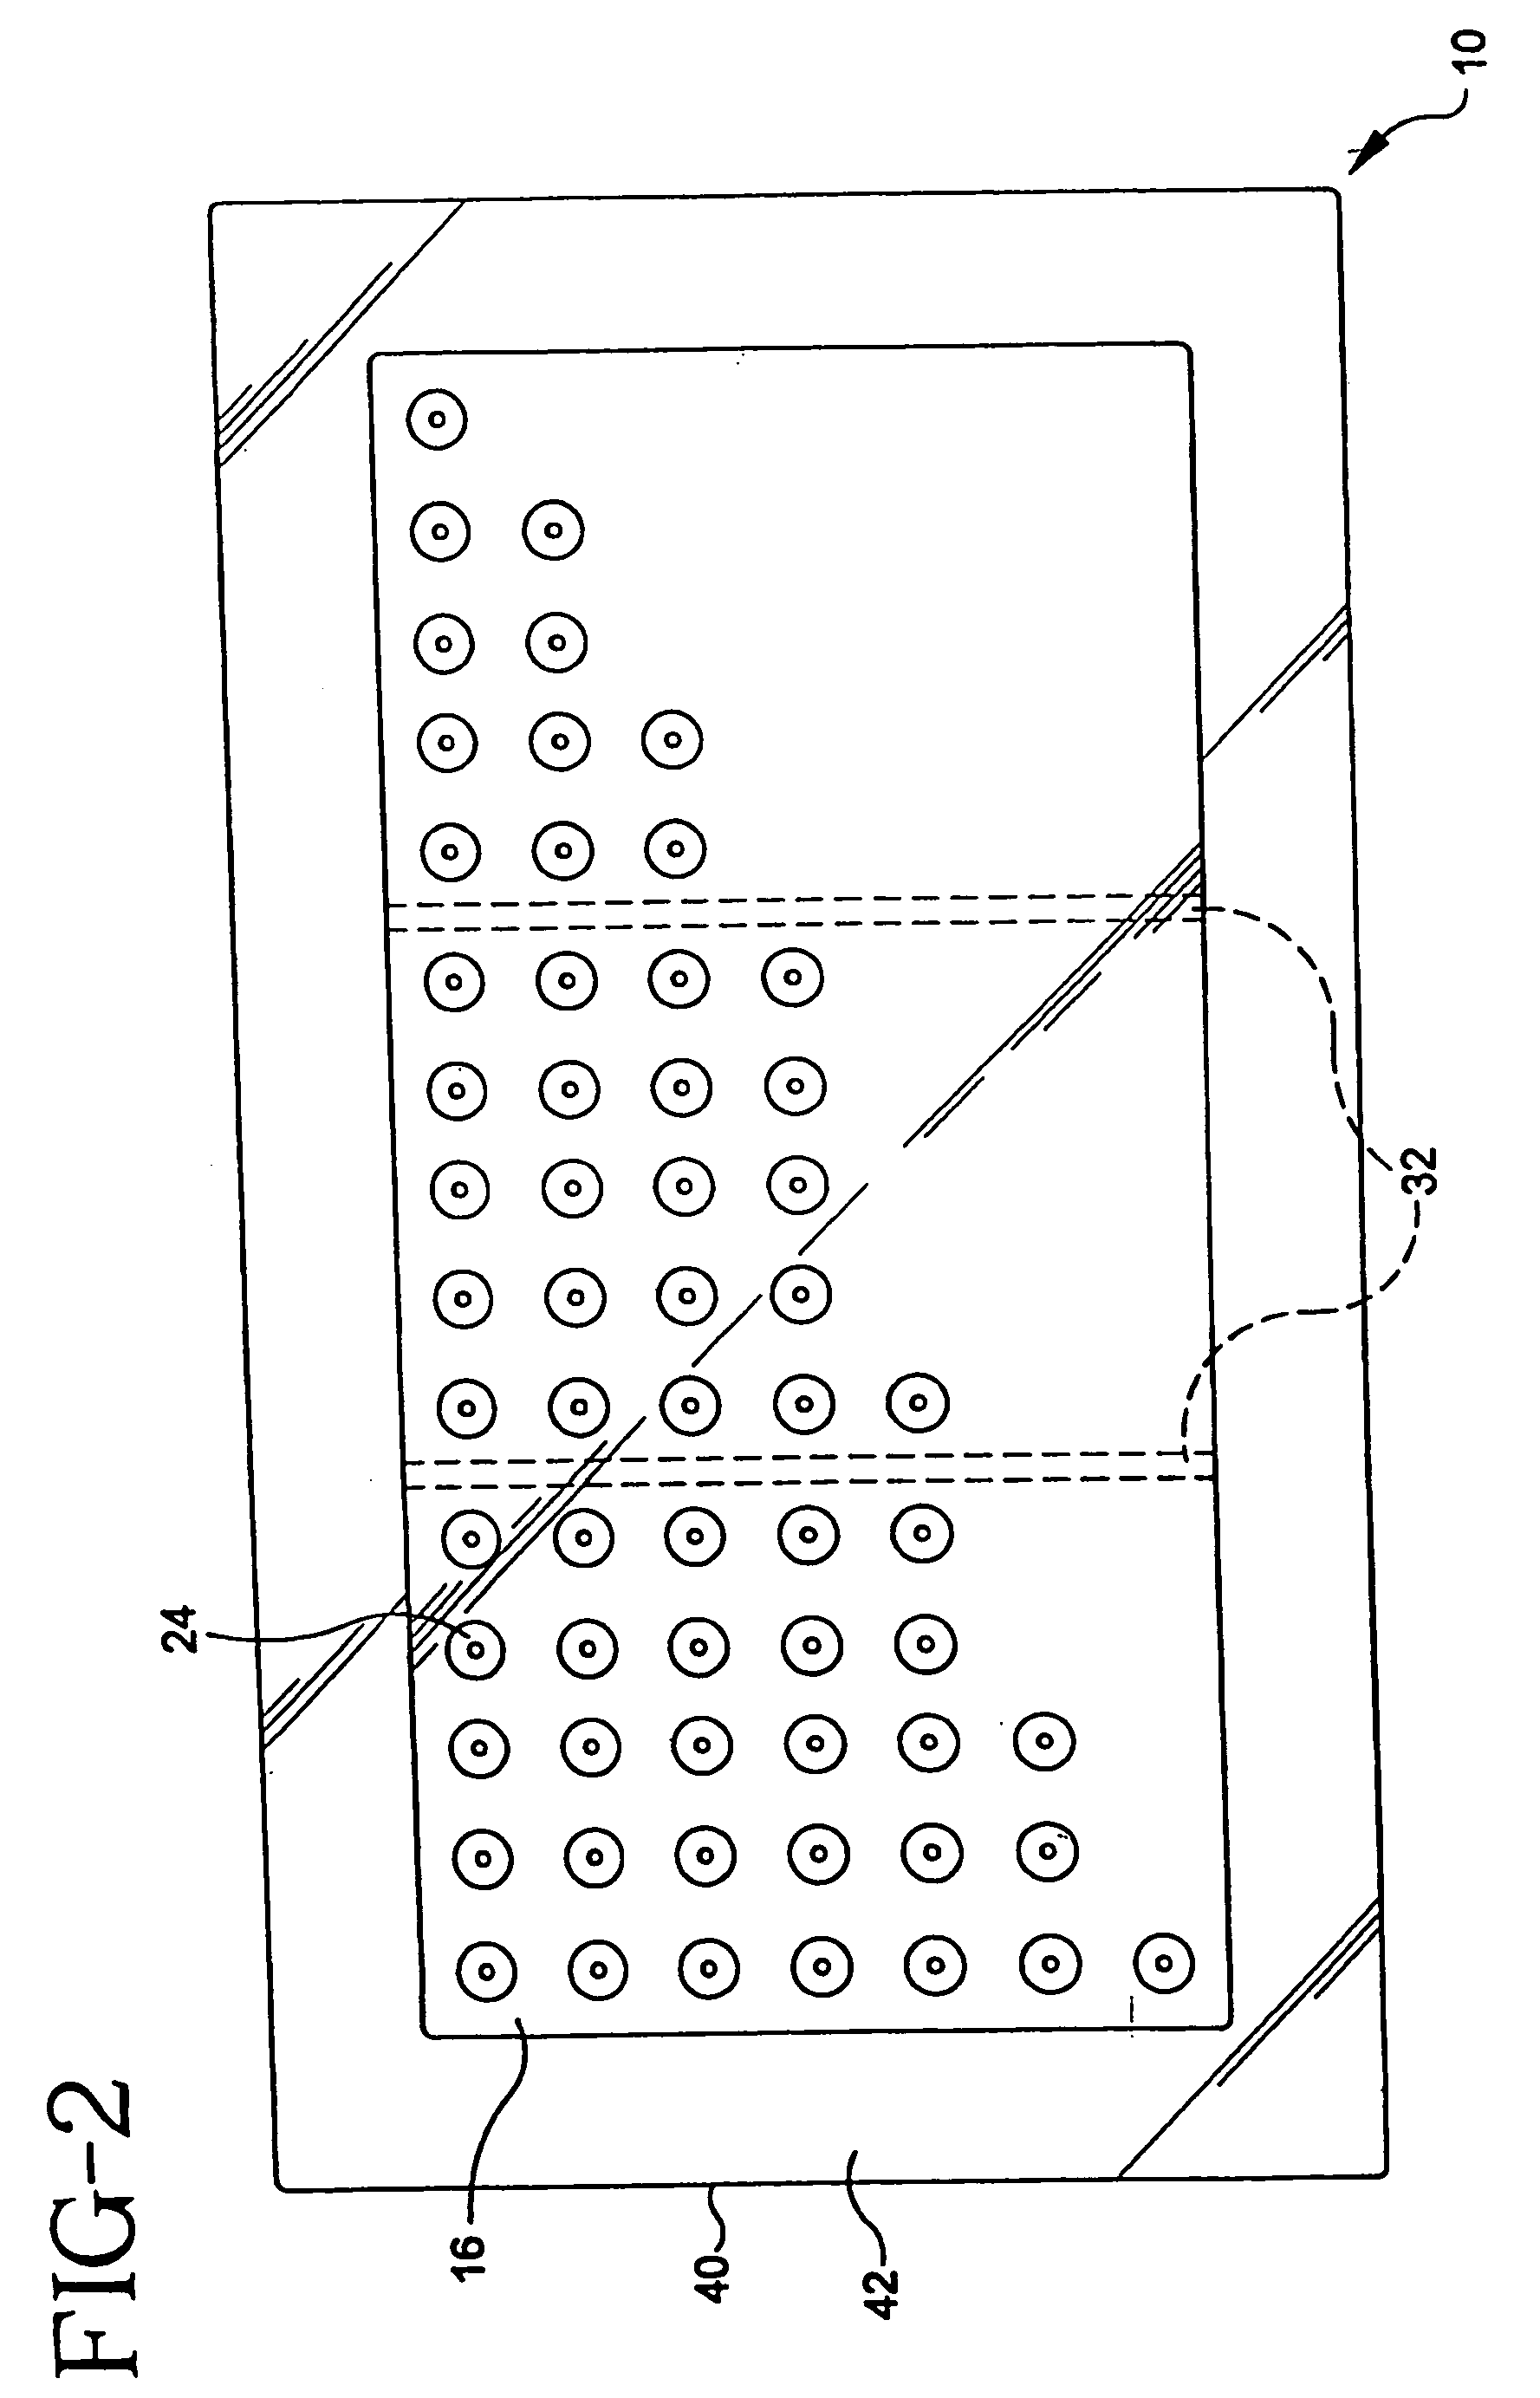 Method and apparatus for the transdermal administration of a substance